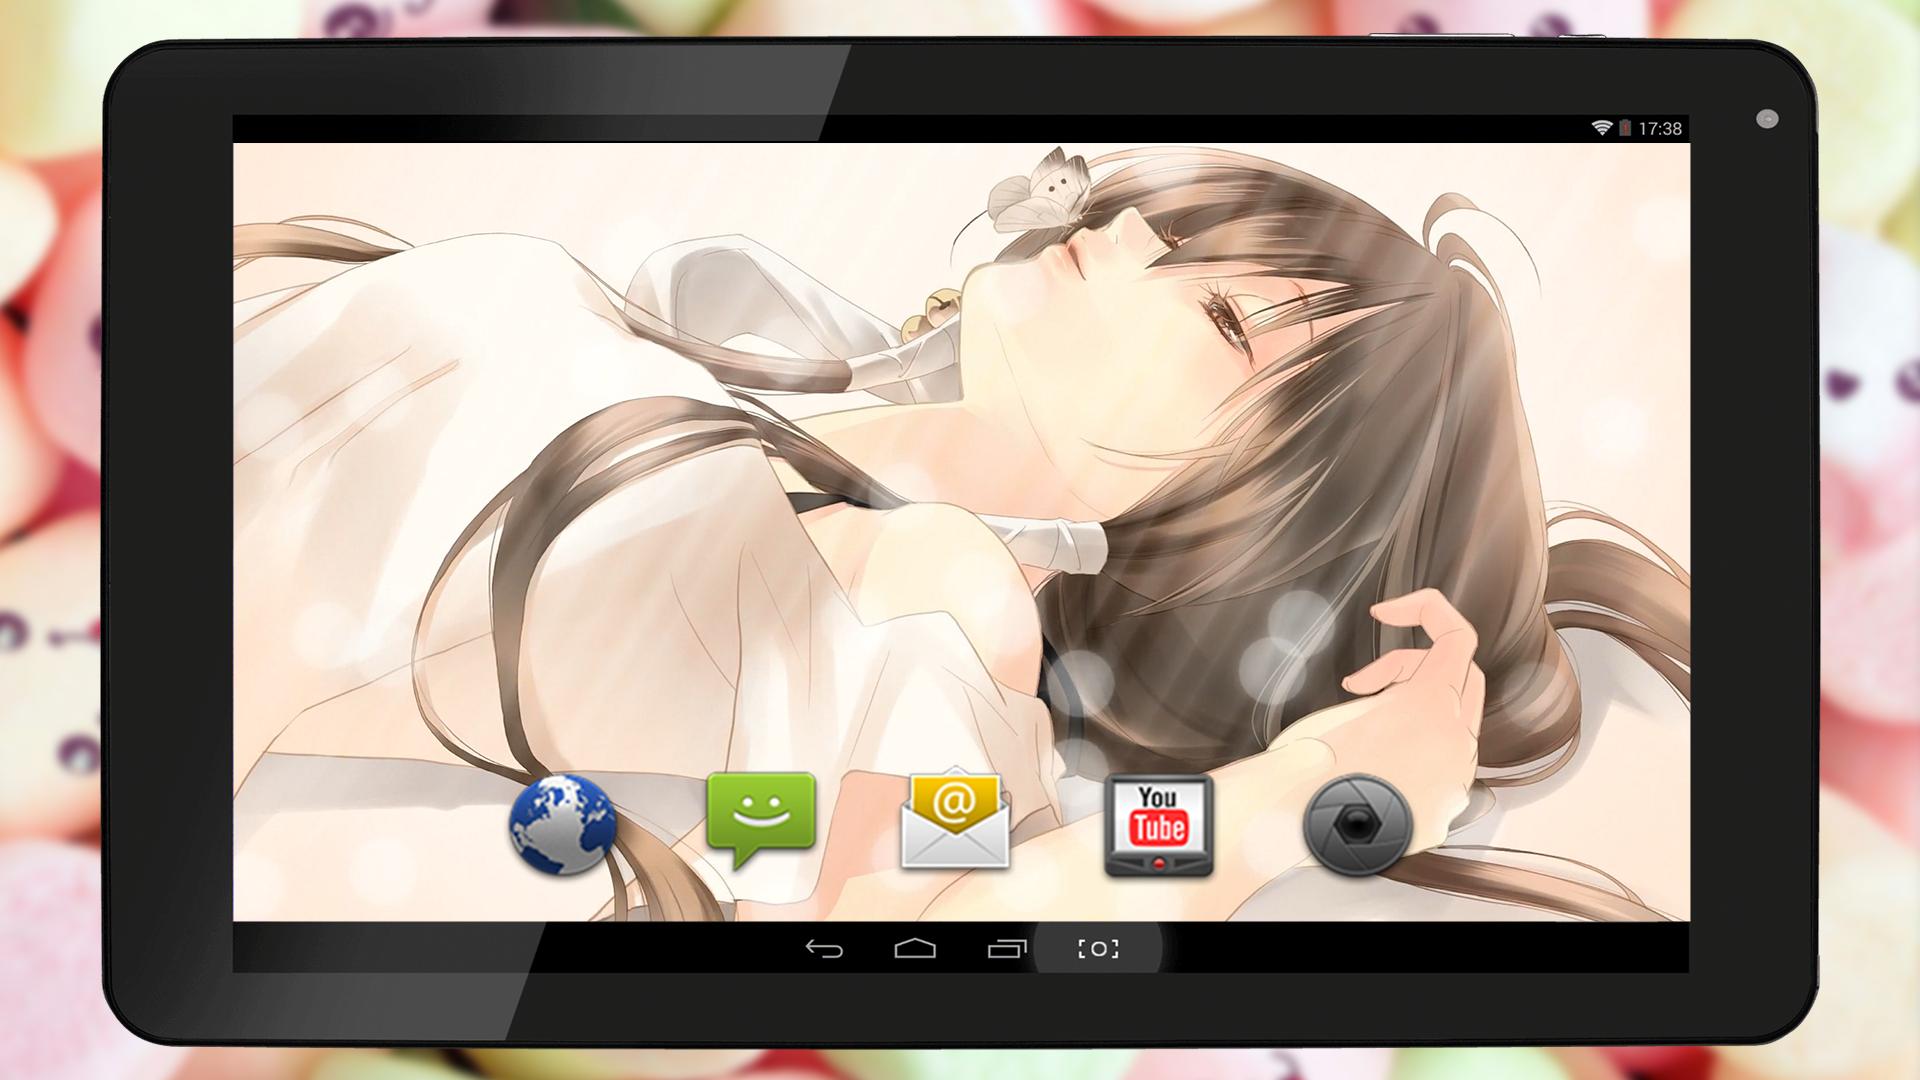 Anime Live Wallpaper Of Kazuki Fuuchouin 風鳥院花月 For Android Apk Download